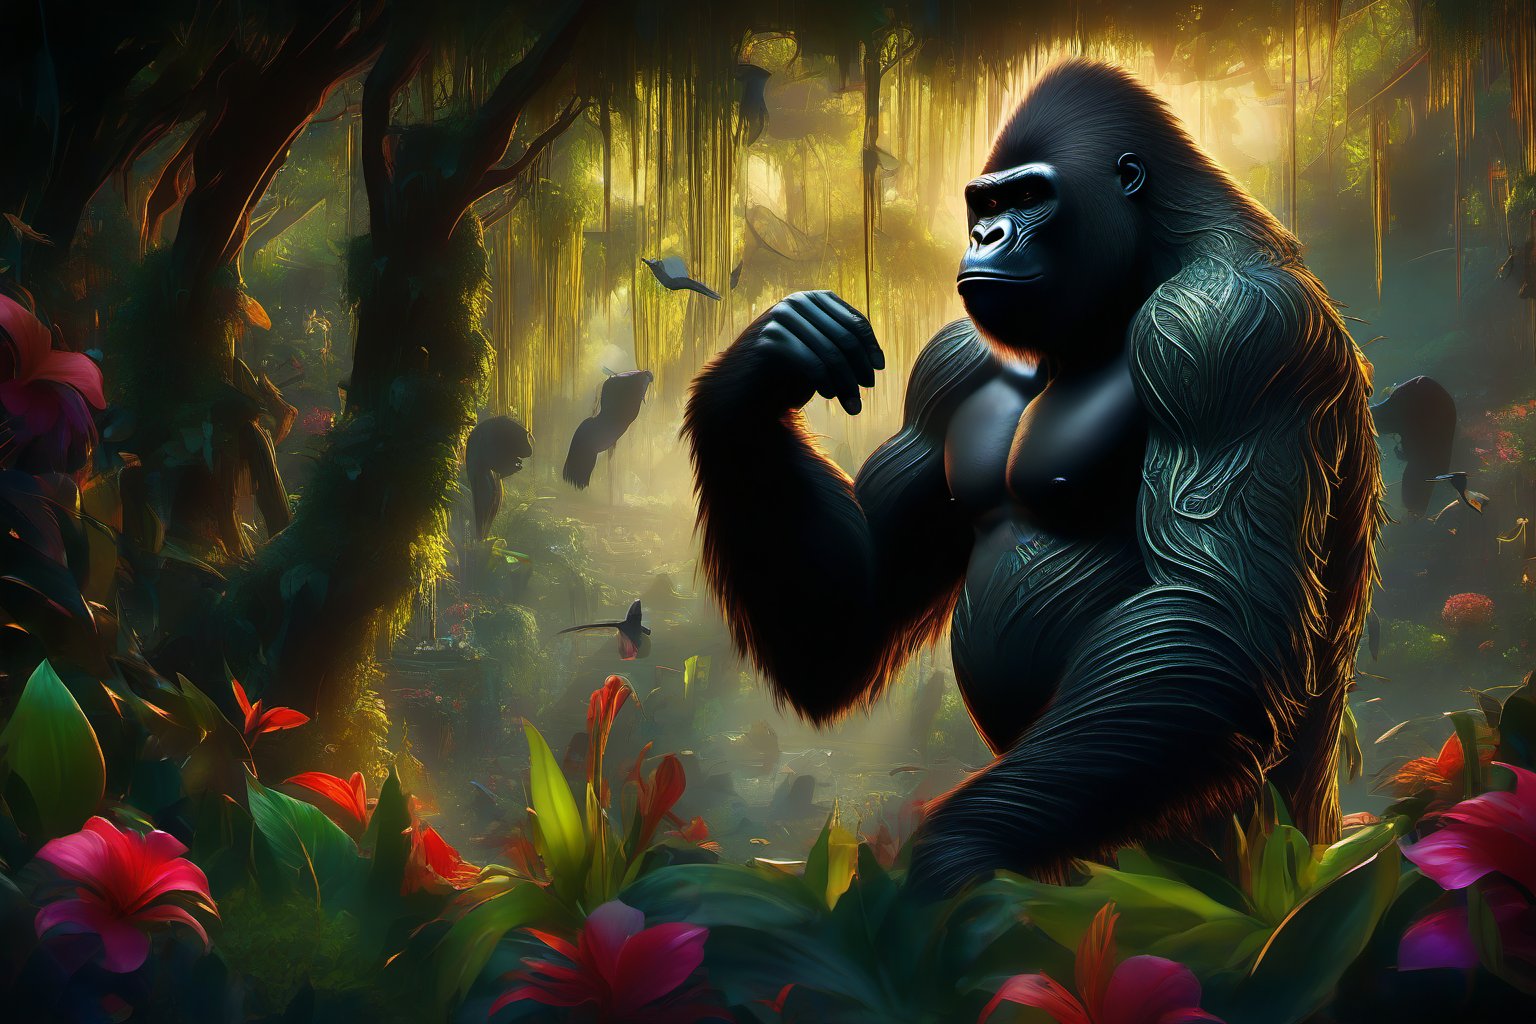 A majestic gorilla stands tall, its imposing figure dominating the lush jungle clearing. Framed by a vibrant green tangle of foliage, the primate's gleaming fur reflects the warm dappled light filtering through the canopy above. The humid air is heavy with the scents of tropical blooms and the sounds of exotic creatures, as the gorilla's powerful presence commands attention in this verdant jungle sanctuary.